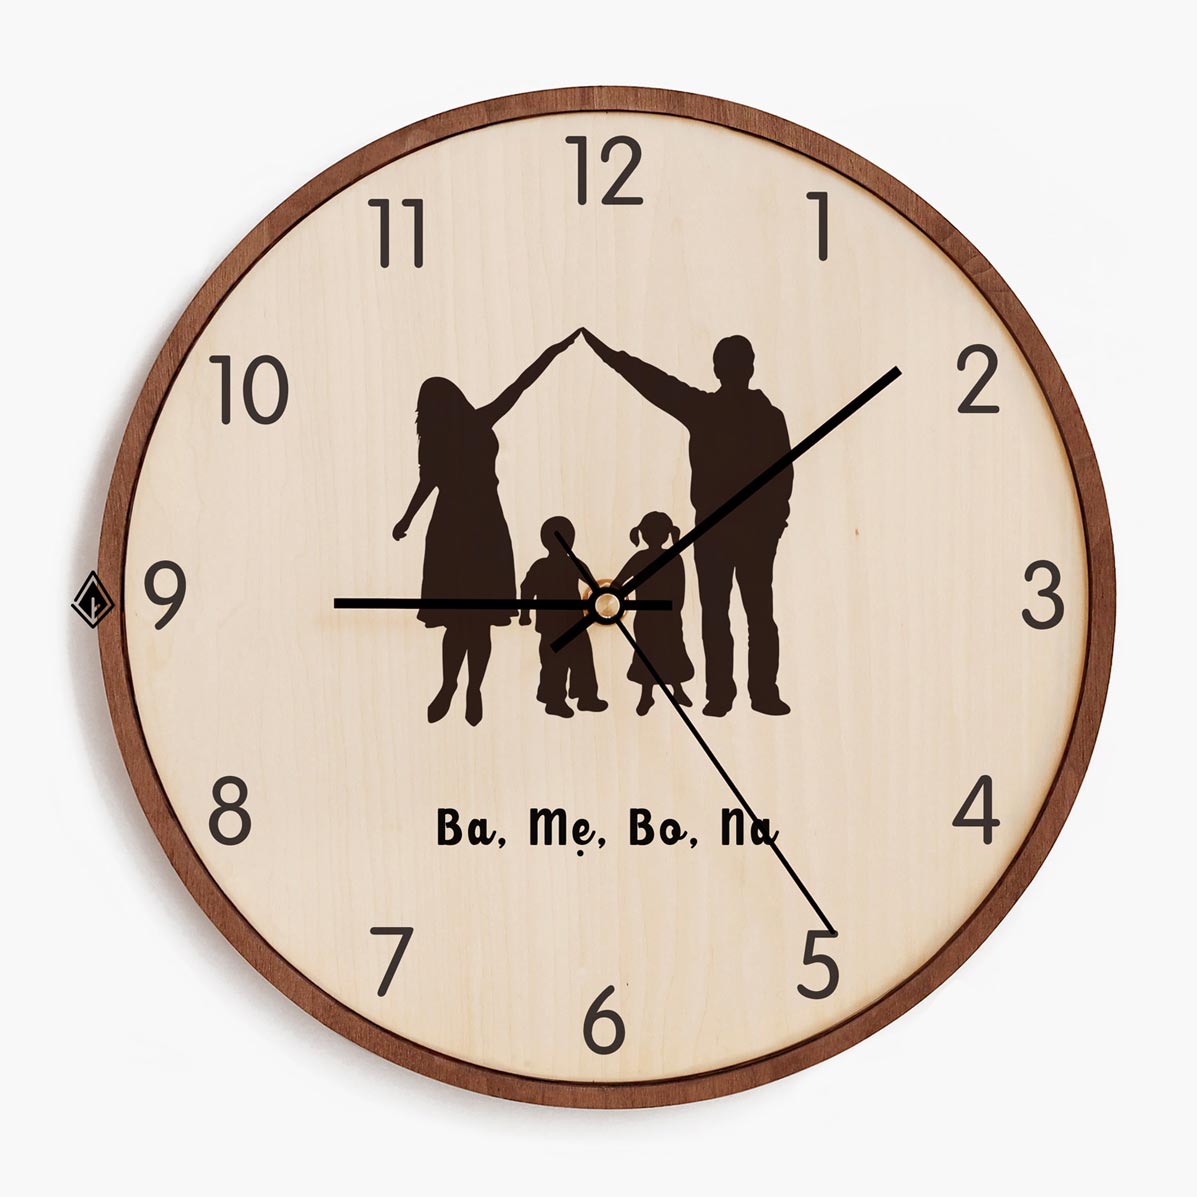 Wooden Wall Clocks Home is where my family is